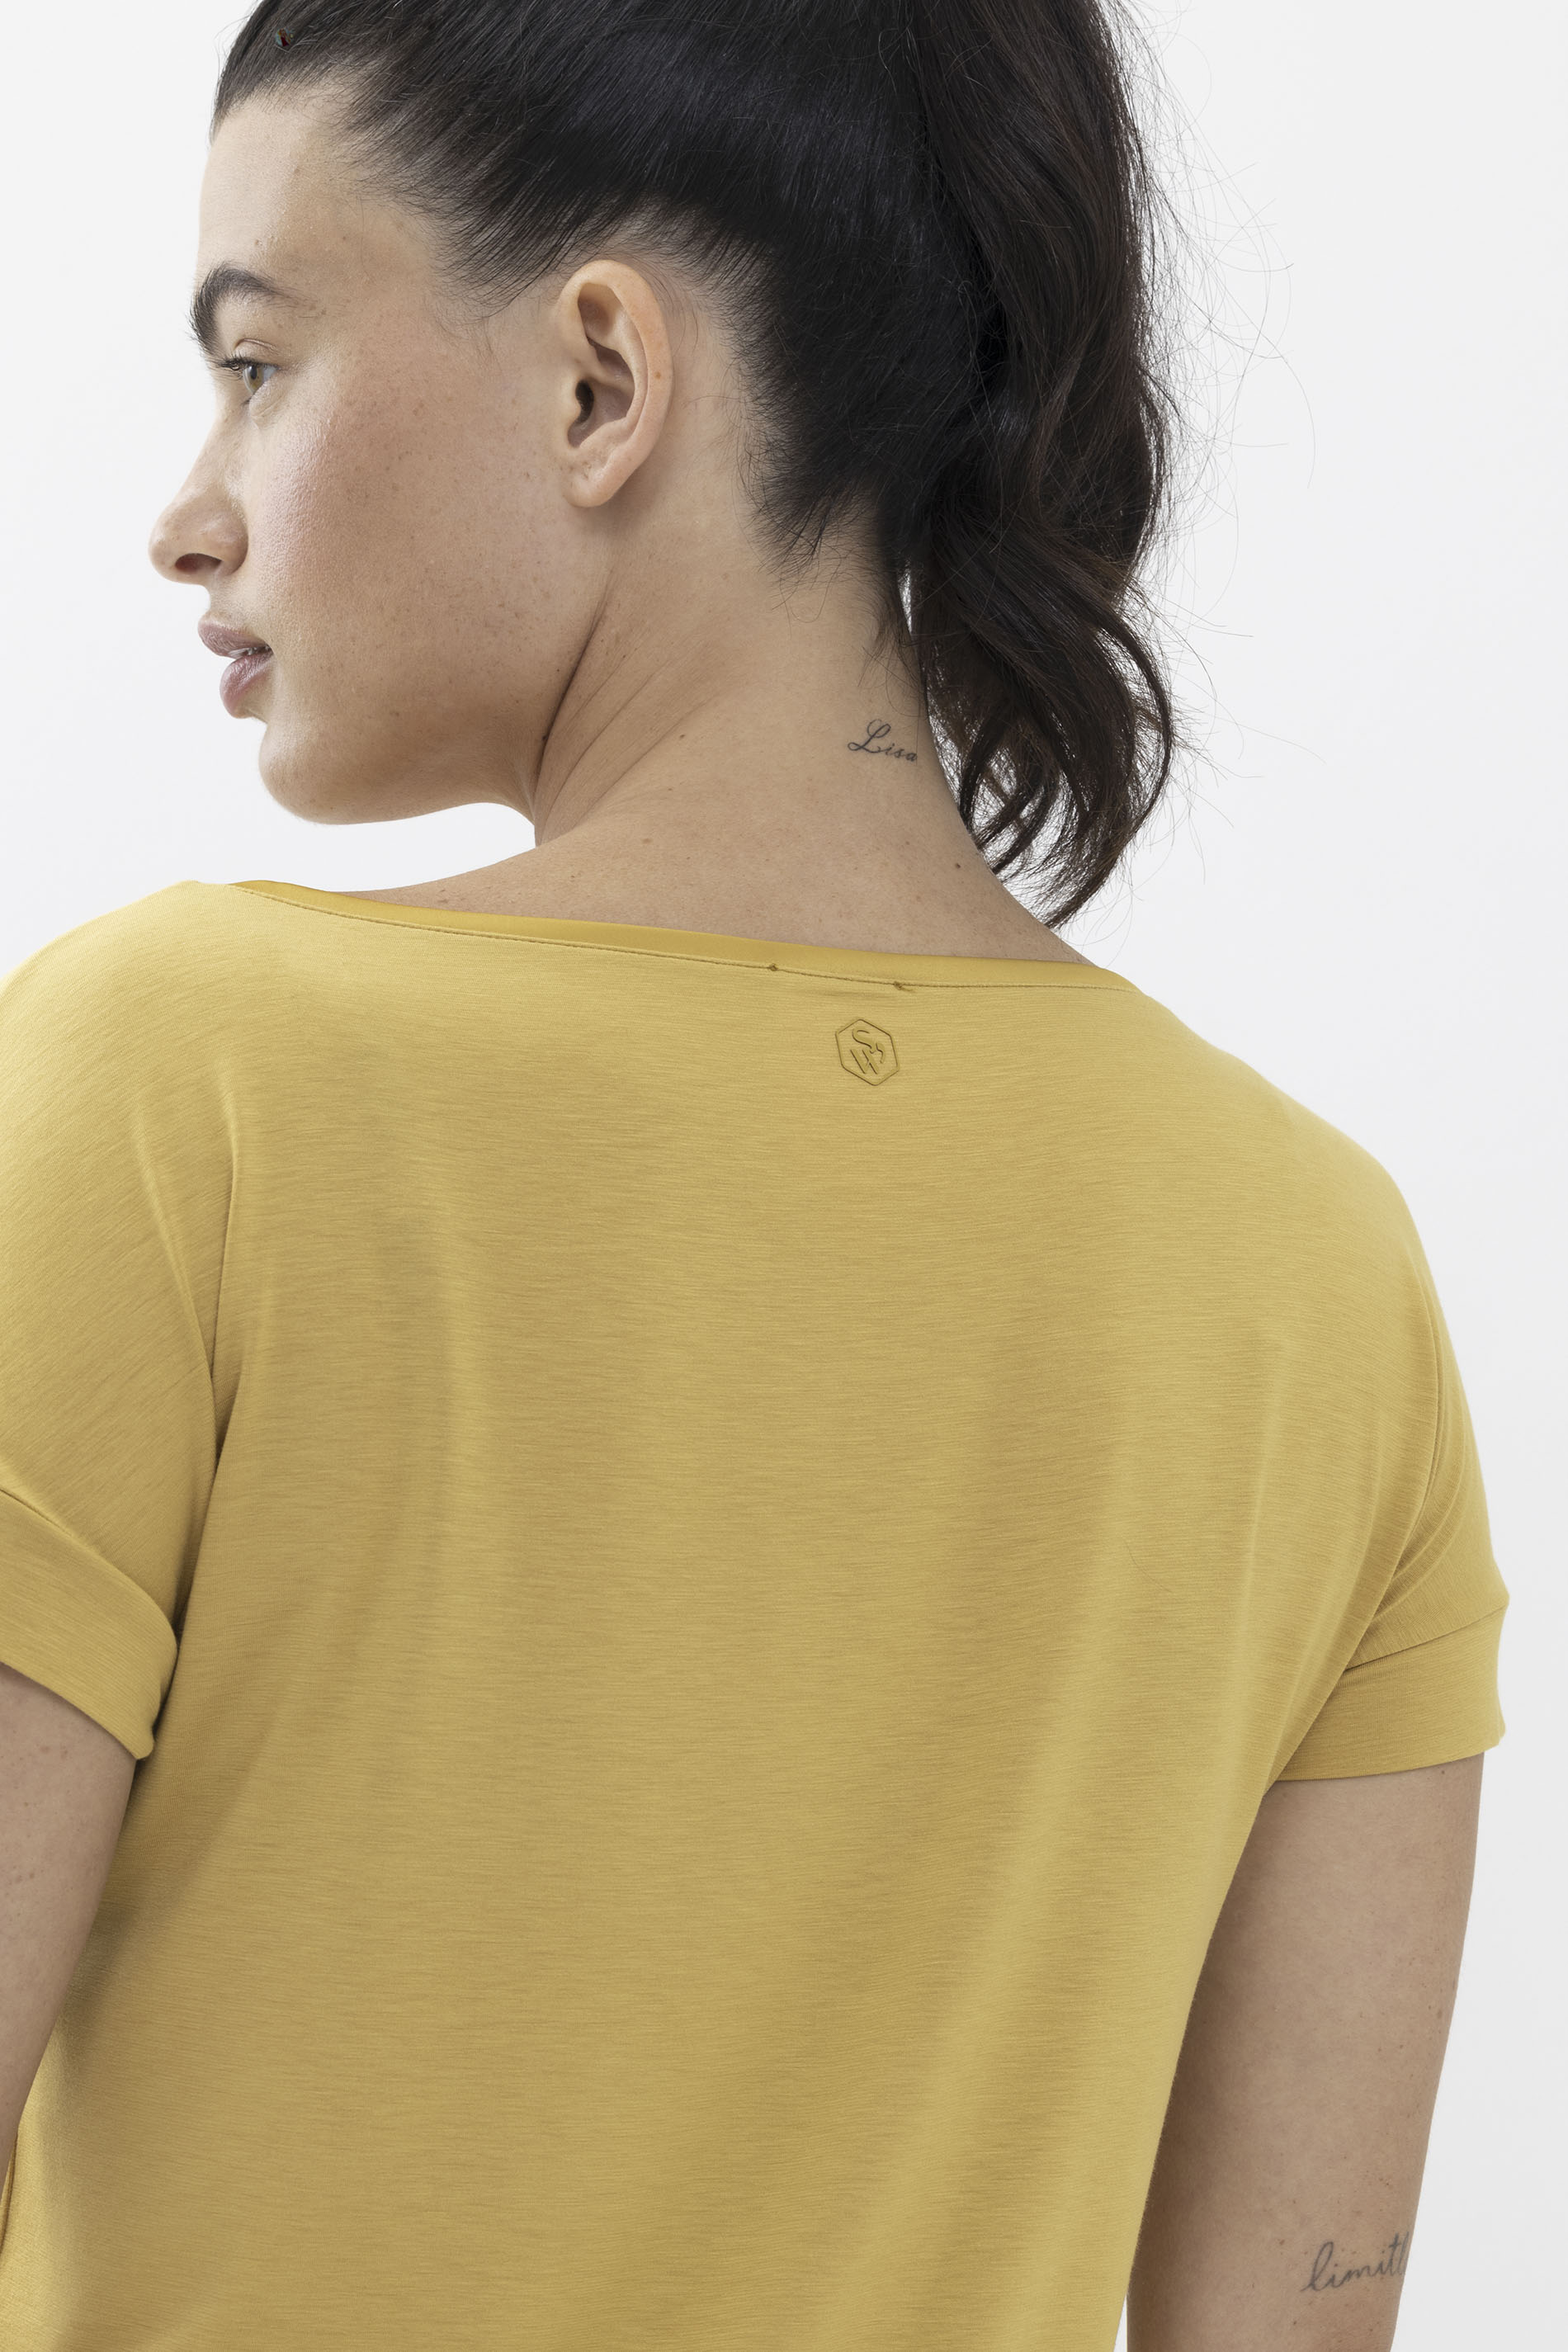 T-shirt Wintergold Serie Breathable Detail View 01 | mey®